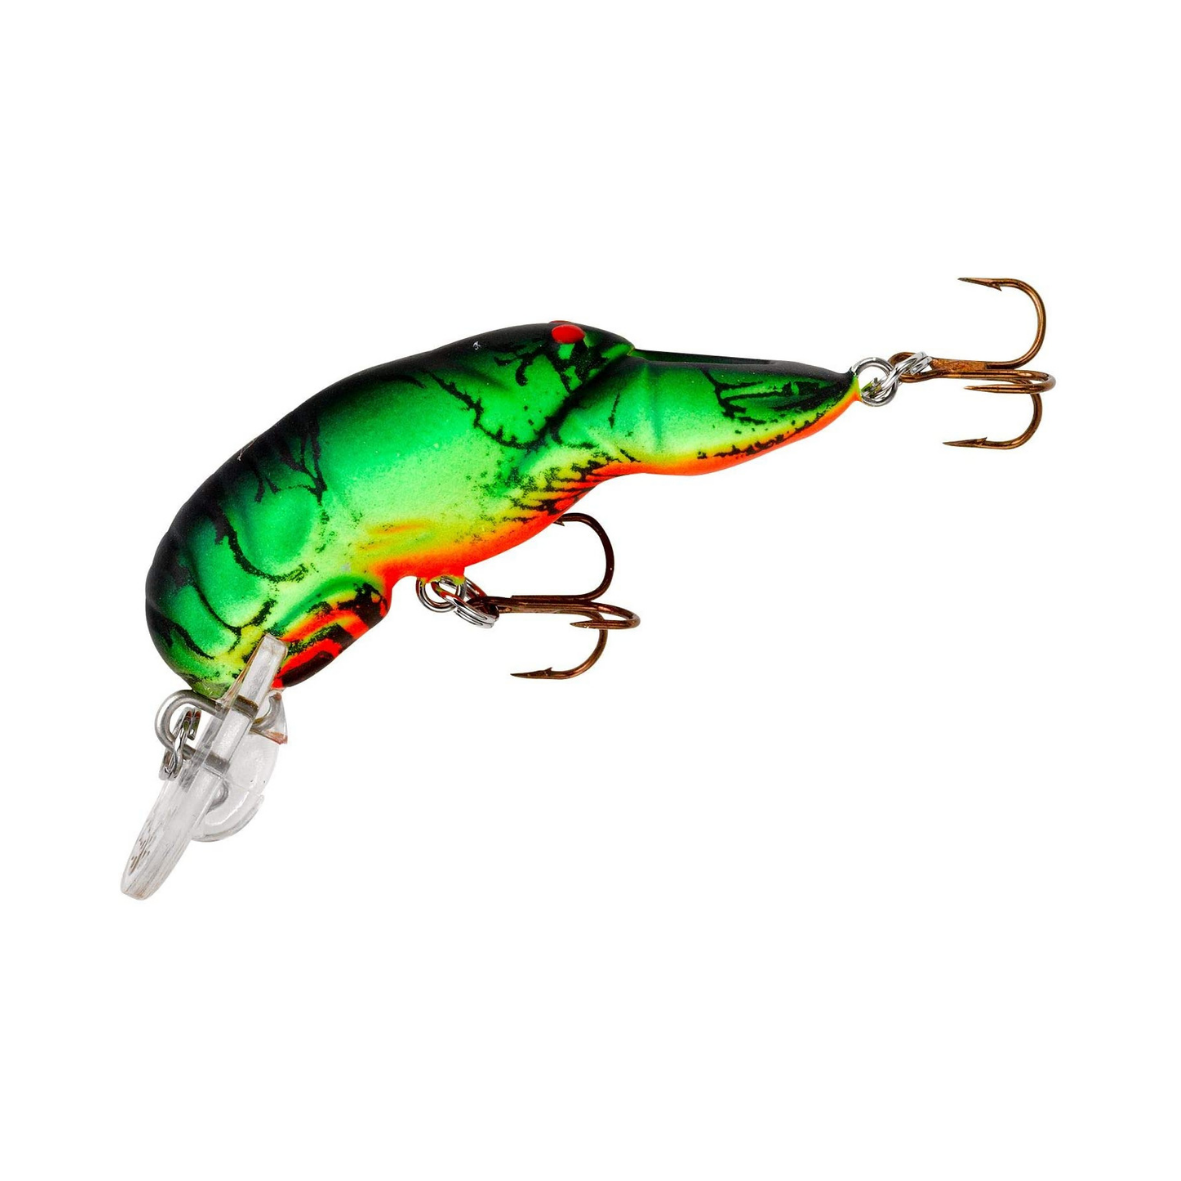 Rebel Lure Teeny Wee Craw Fire Tiger